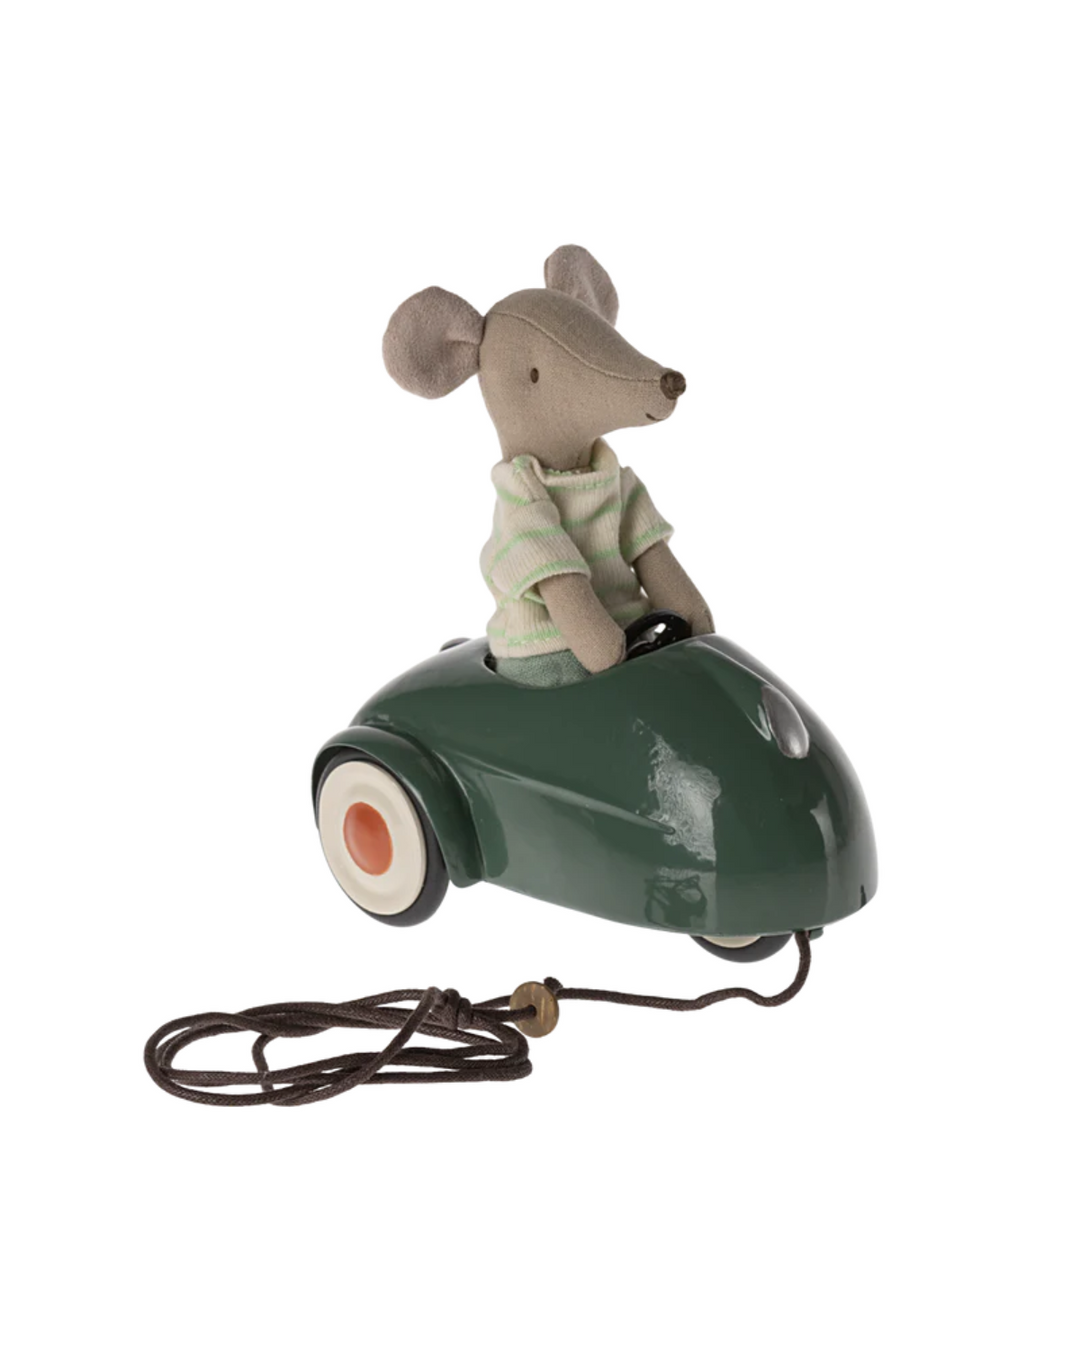 Dark Green Maileg Mouse Car - Charming Dollhouse Toy for Kids